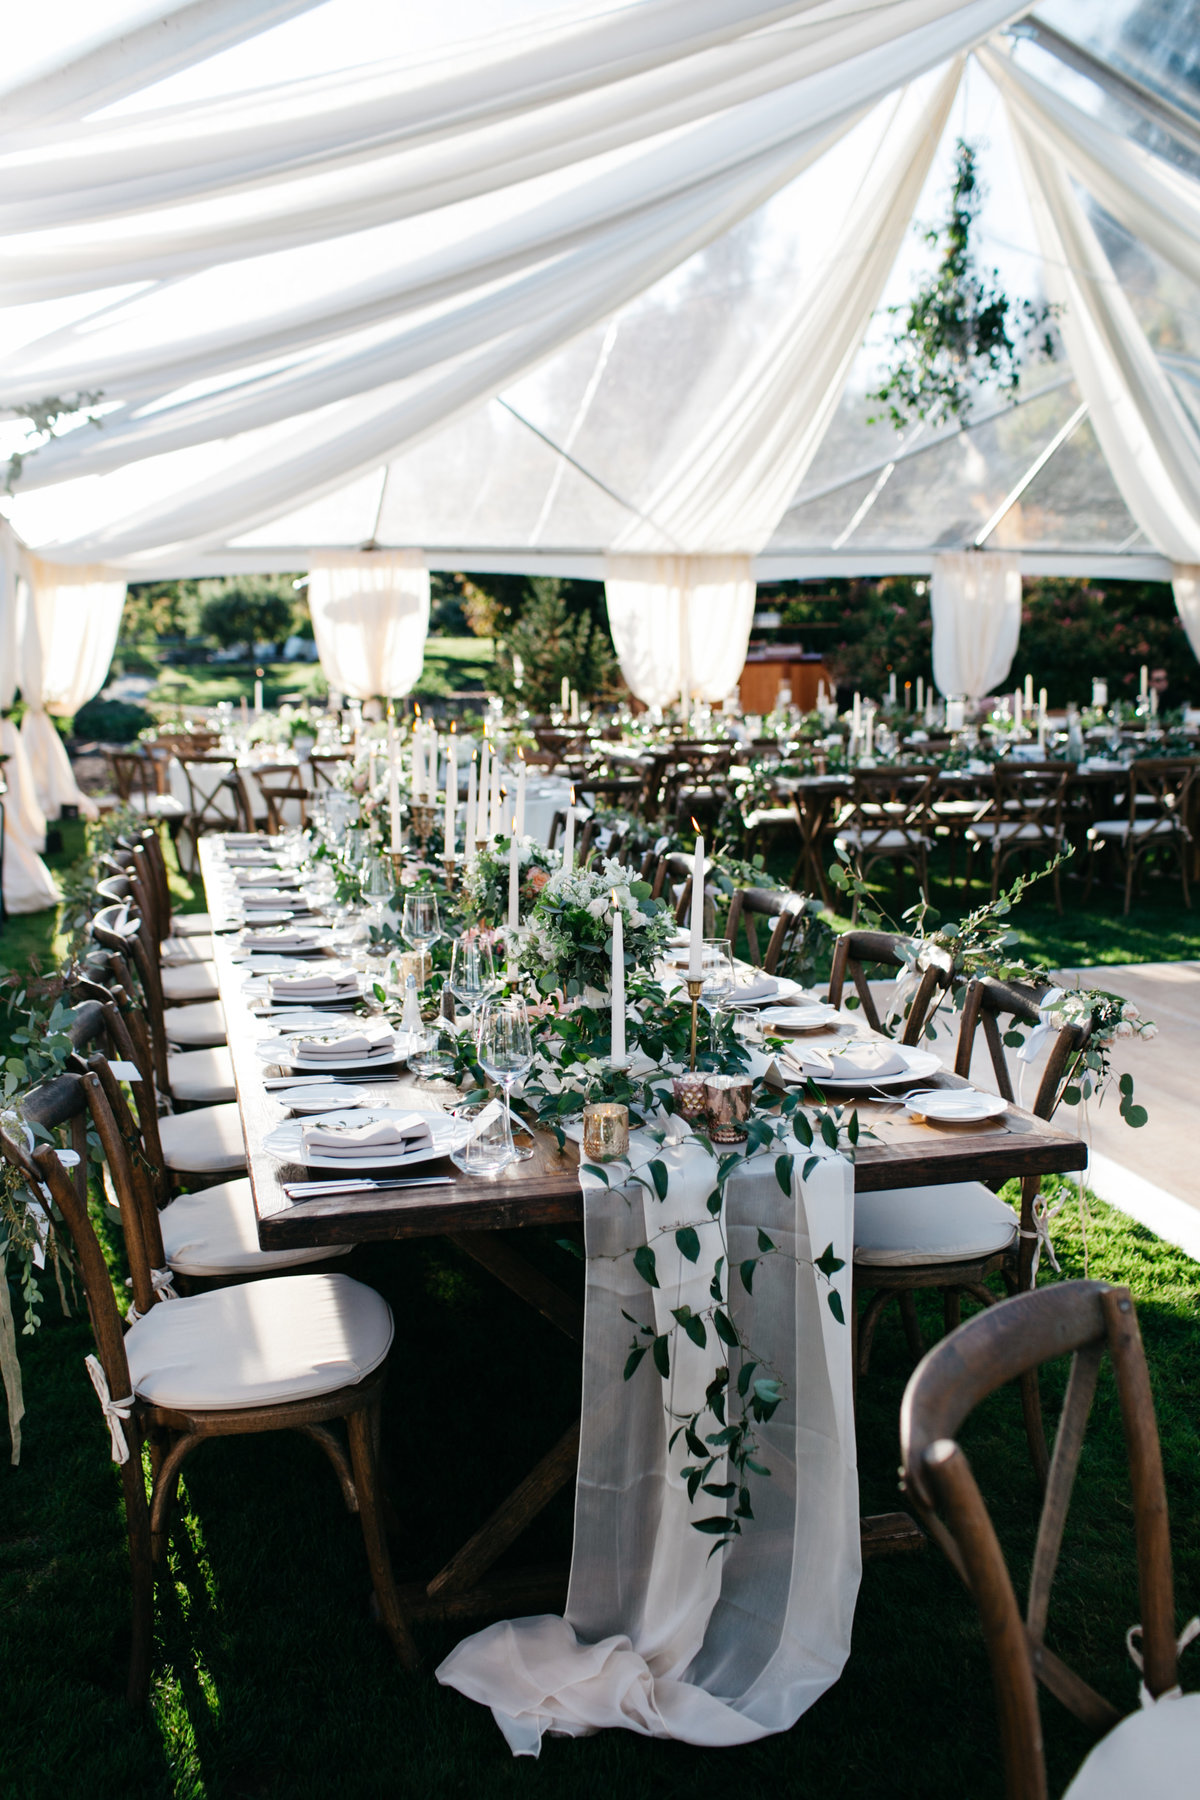 Summer tent wedding by the water filled with sunlight and green vines.